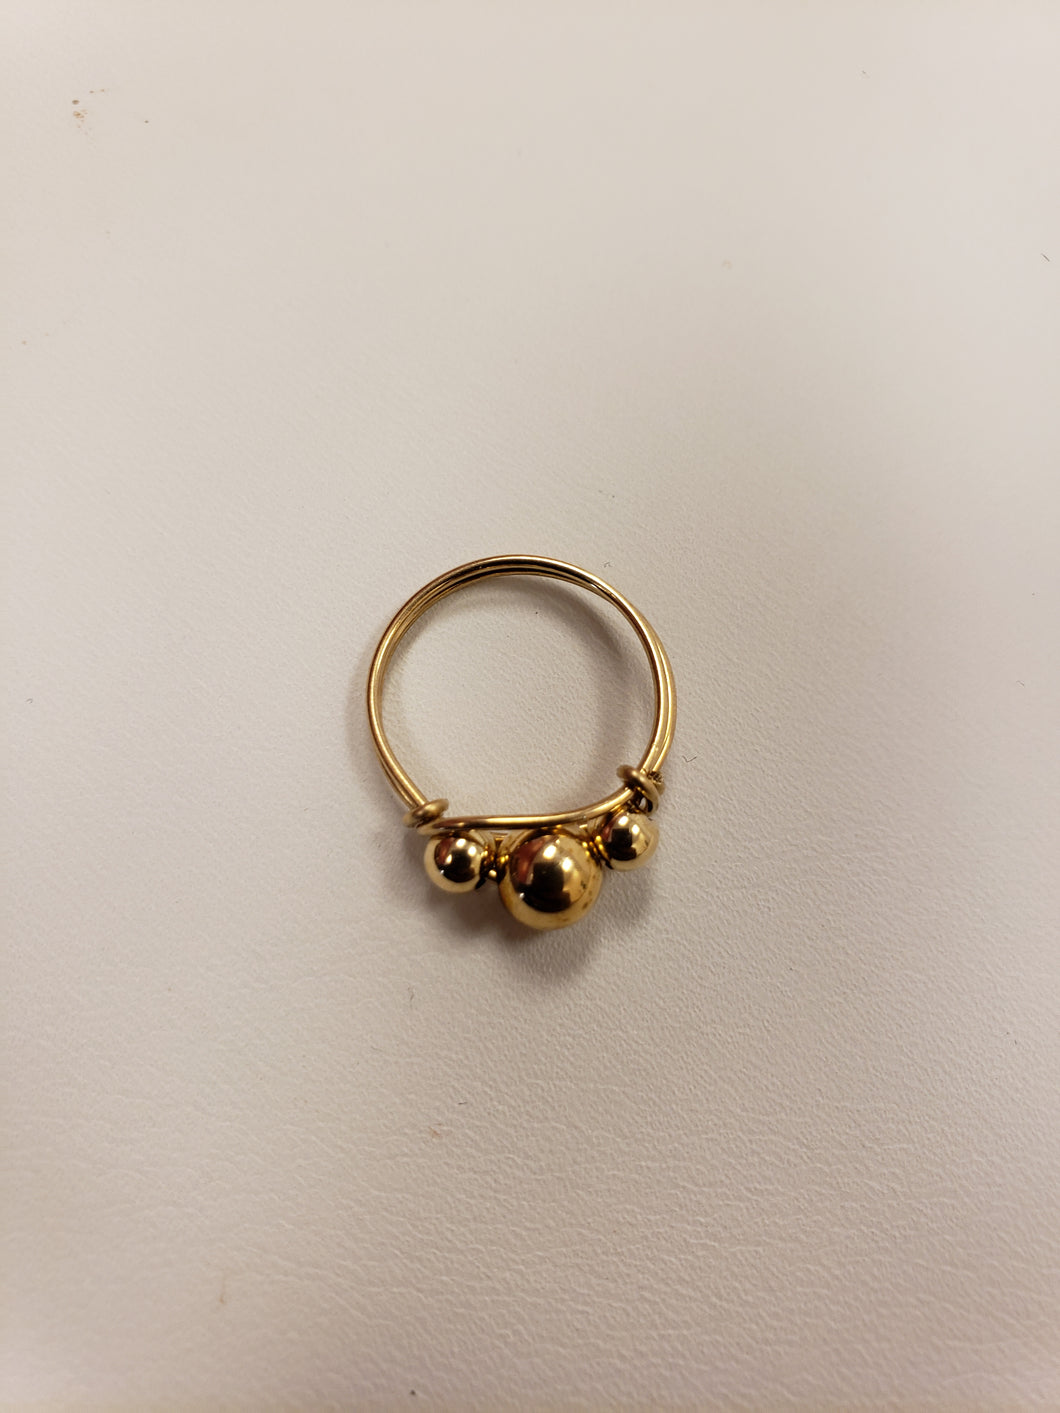 6mm Smooth Ball Ring